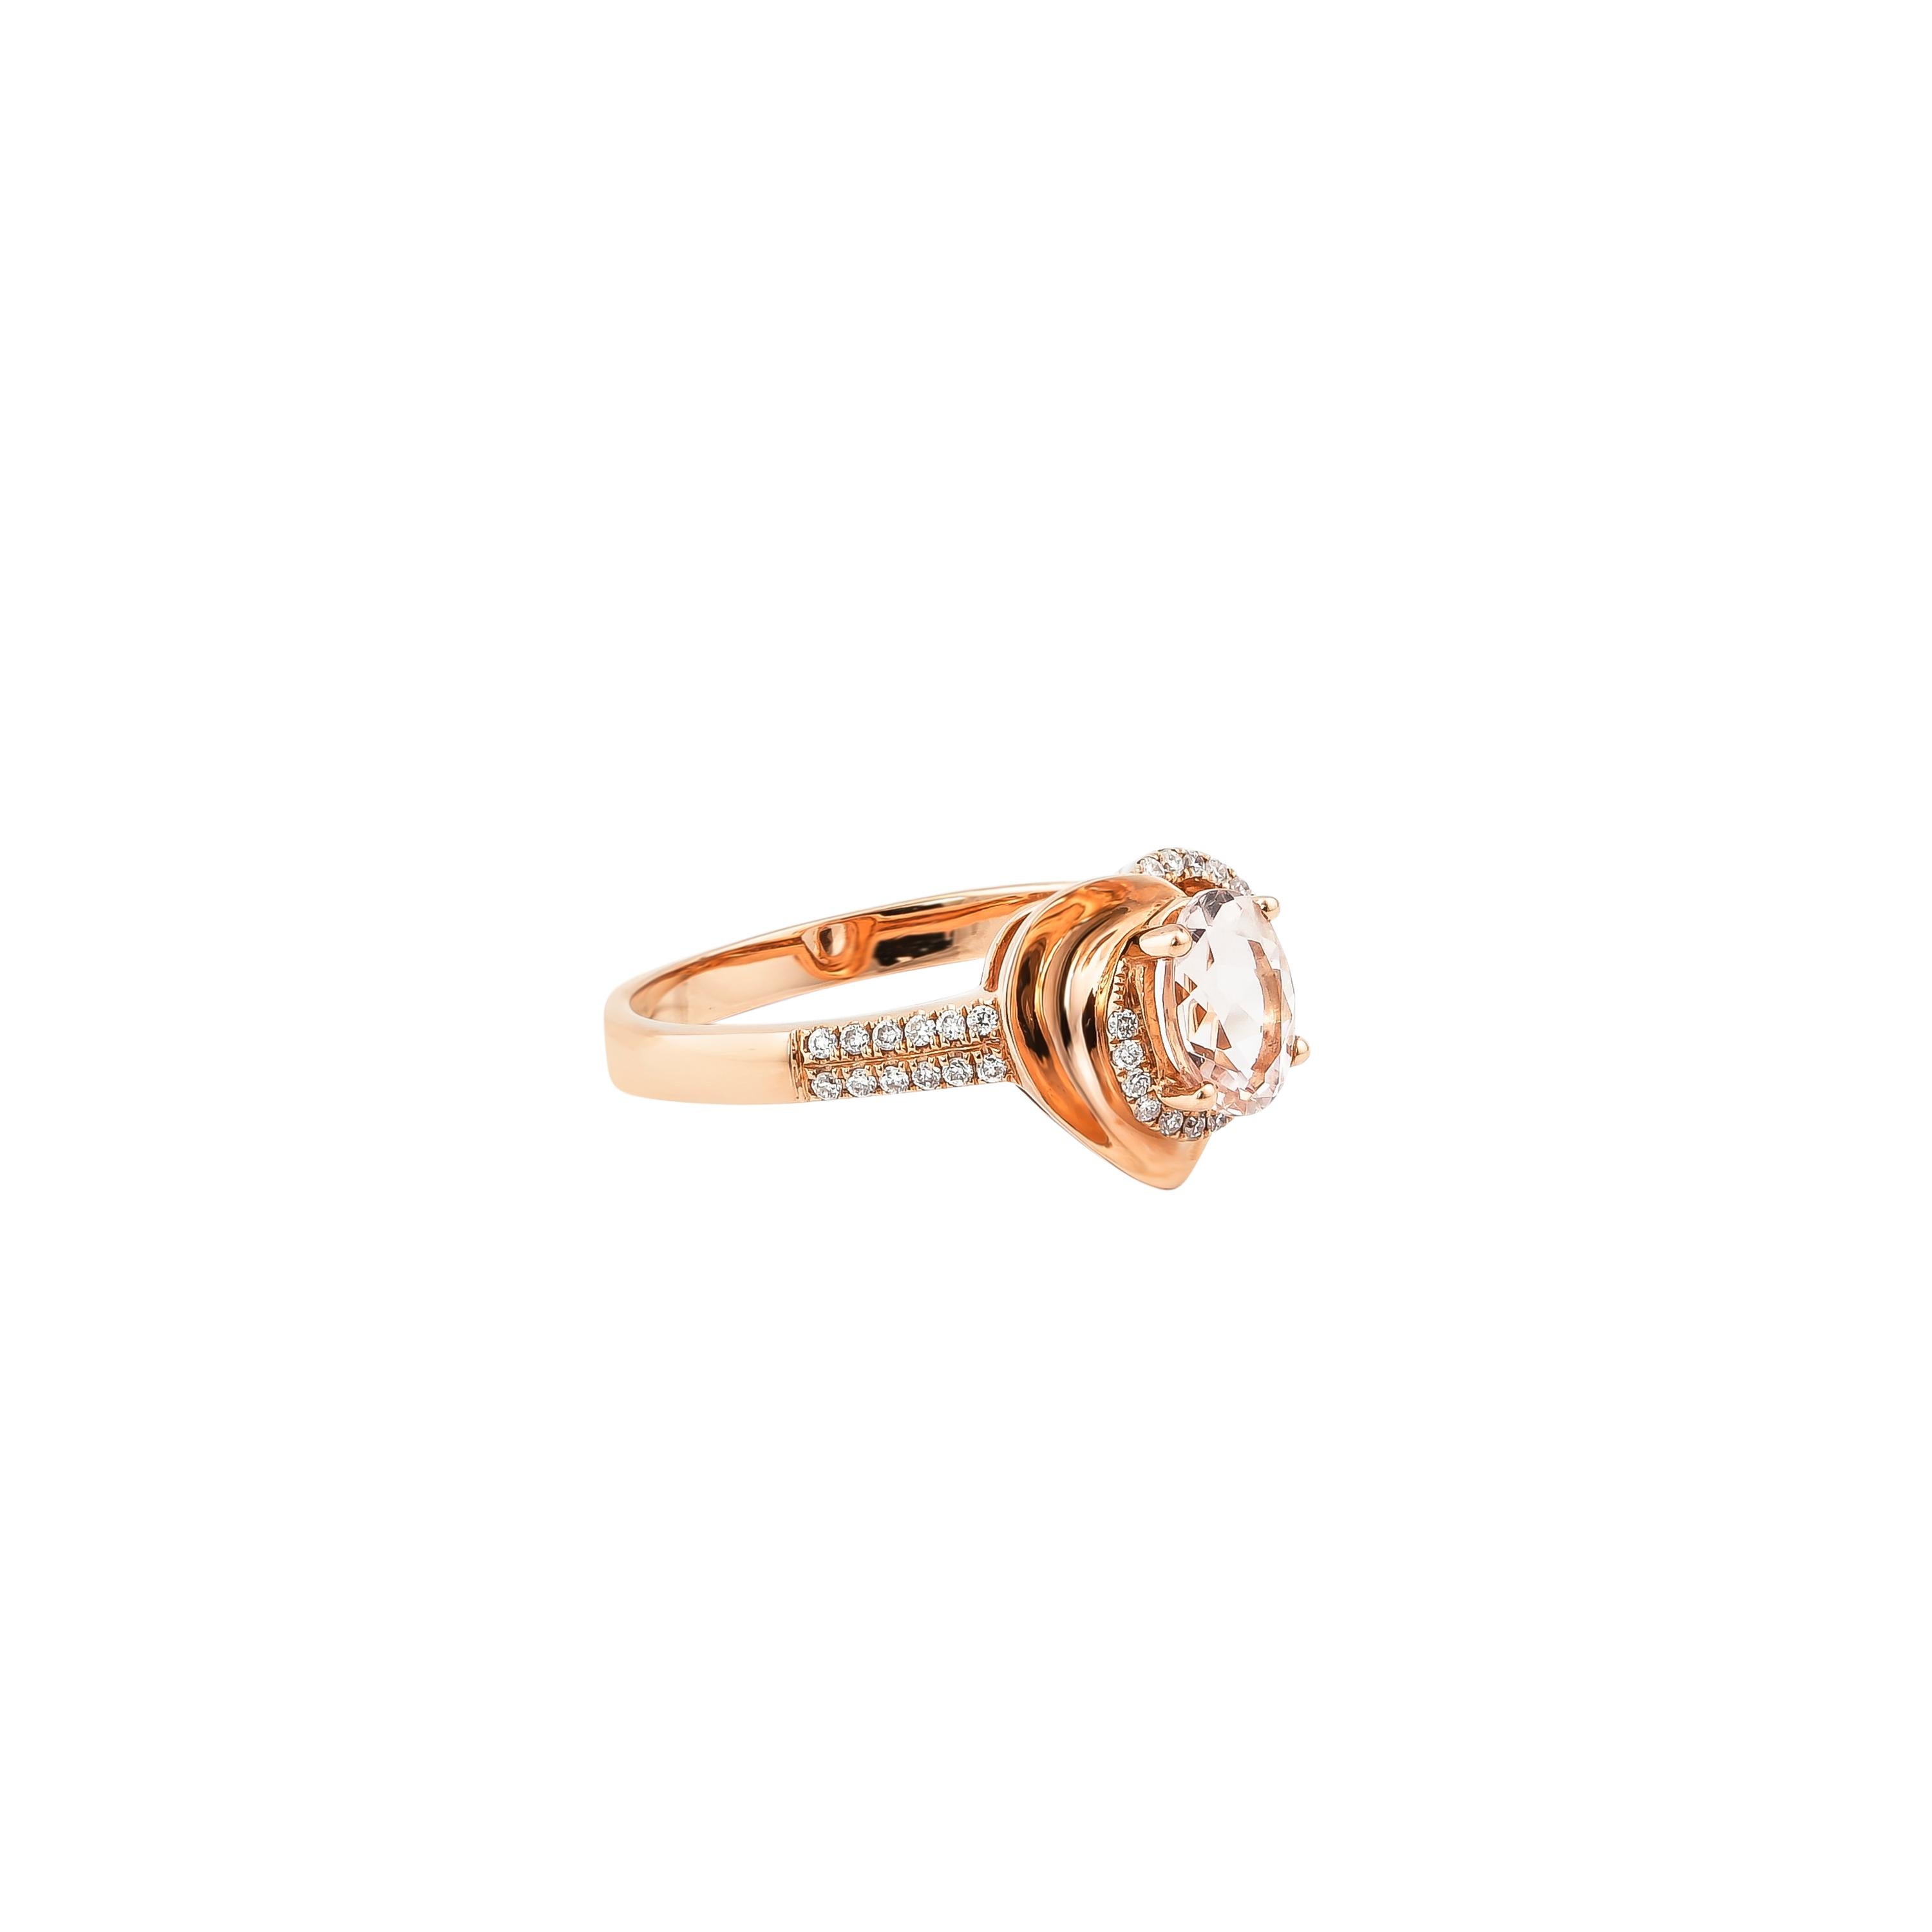 This collection features an array of magnificent morganites! Accented with diamonds these rings are made in rose gold and present a classic yet elegant look. 

Classic morganite ring in 18K rose gold with diamonds. 

Morganite: 0.747 carat oval